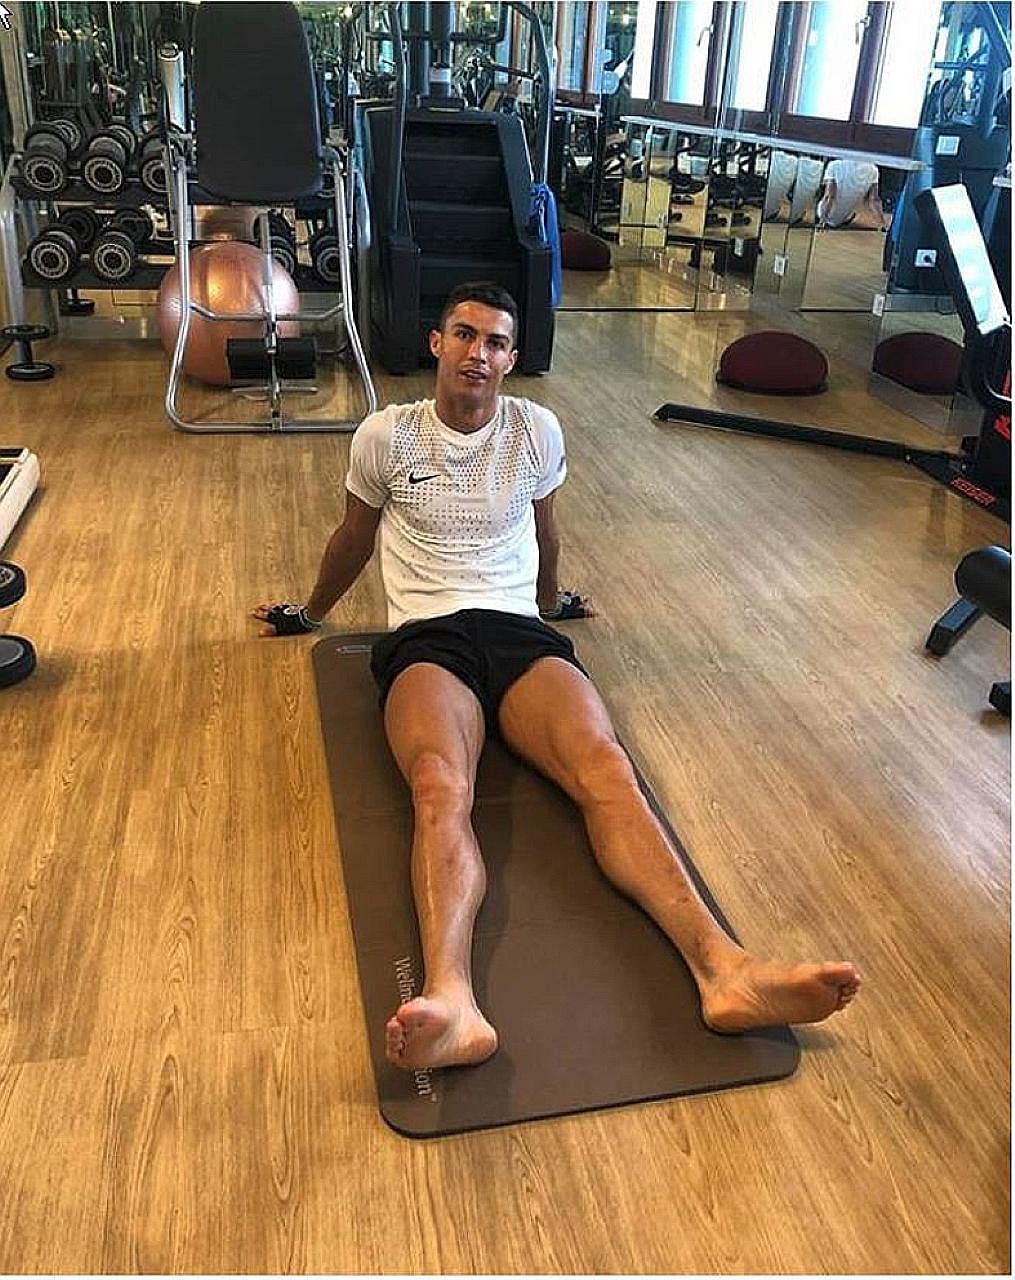 Footballer Ronaldo's recent Instagram photo of his workout scored four million likes in just a few hours.